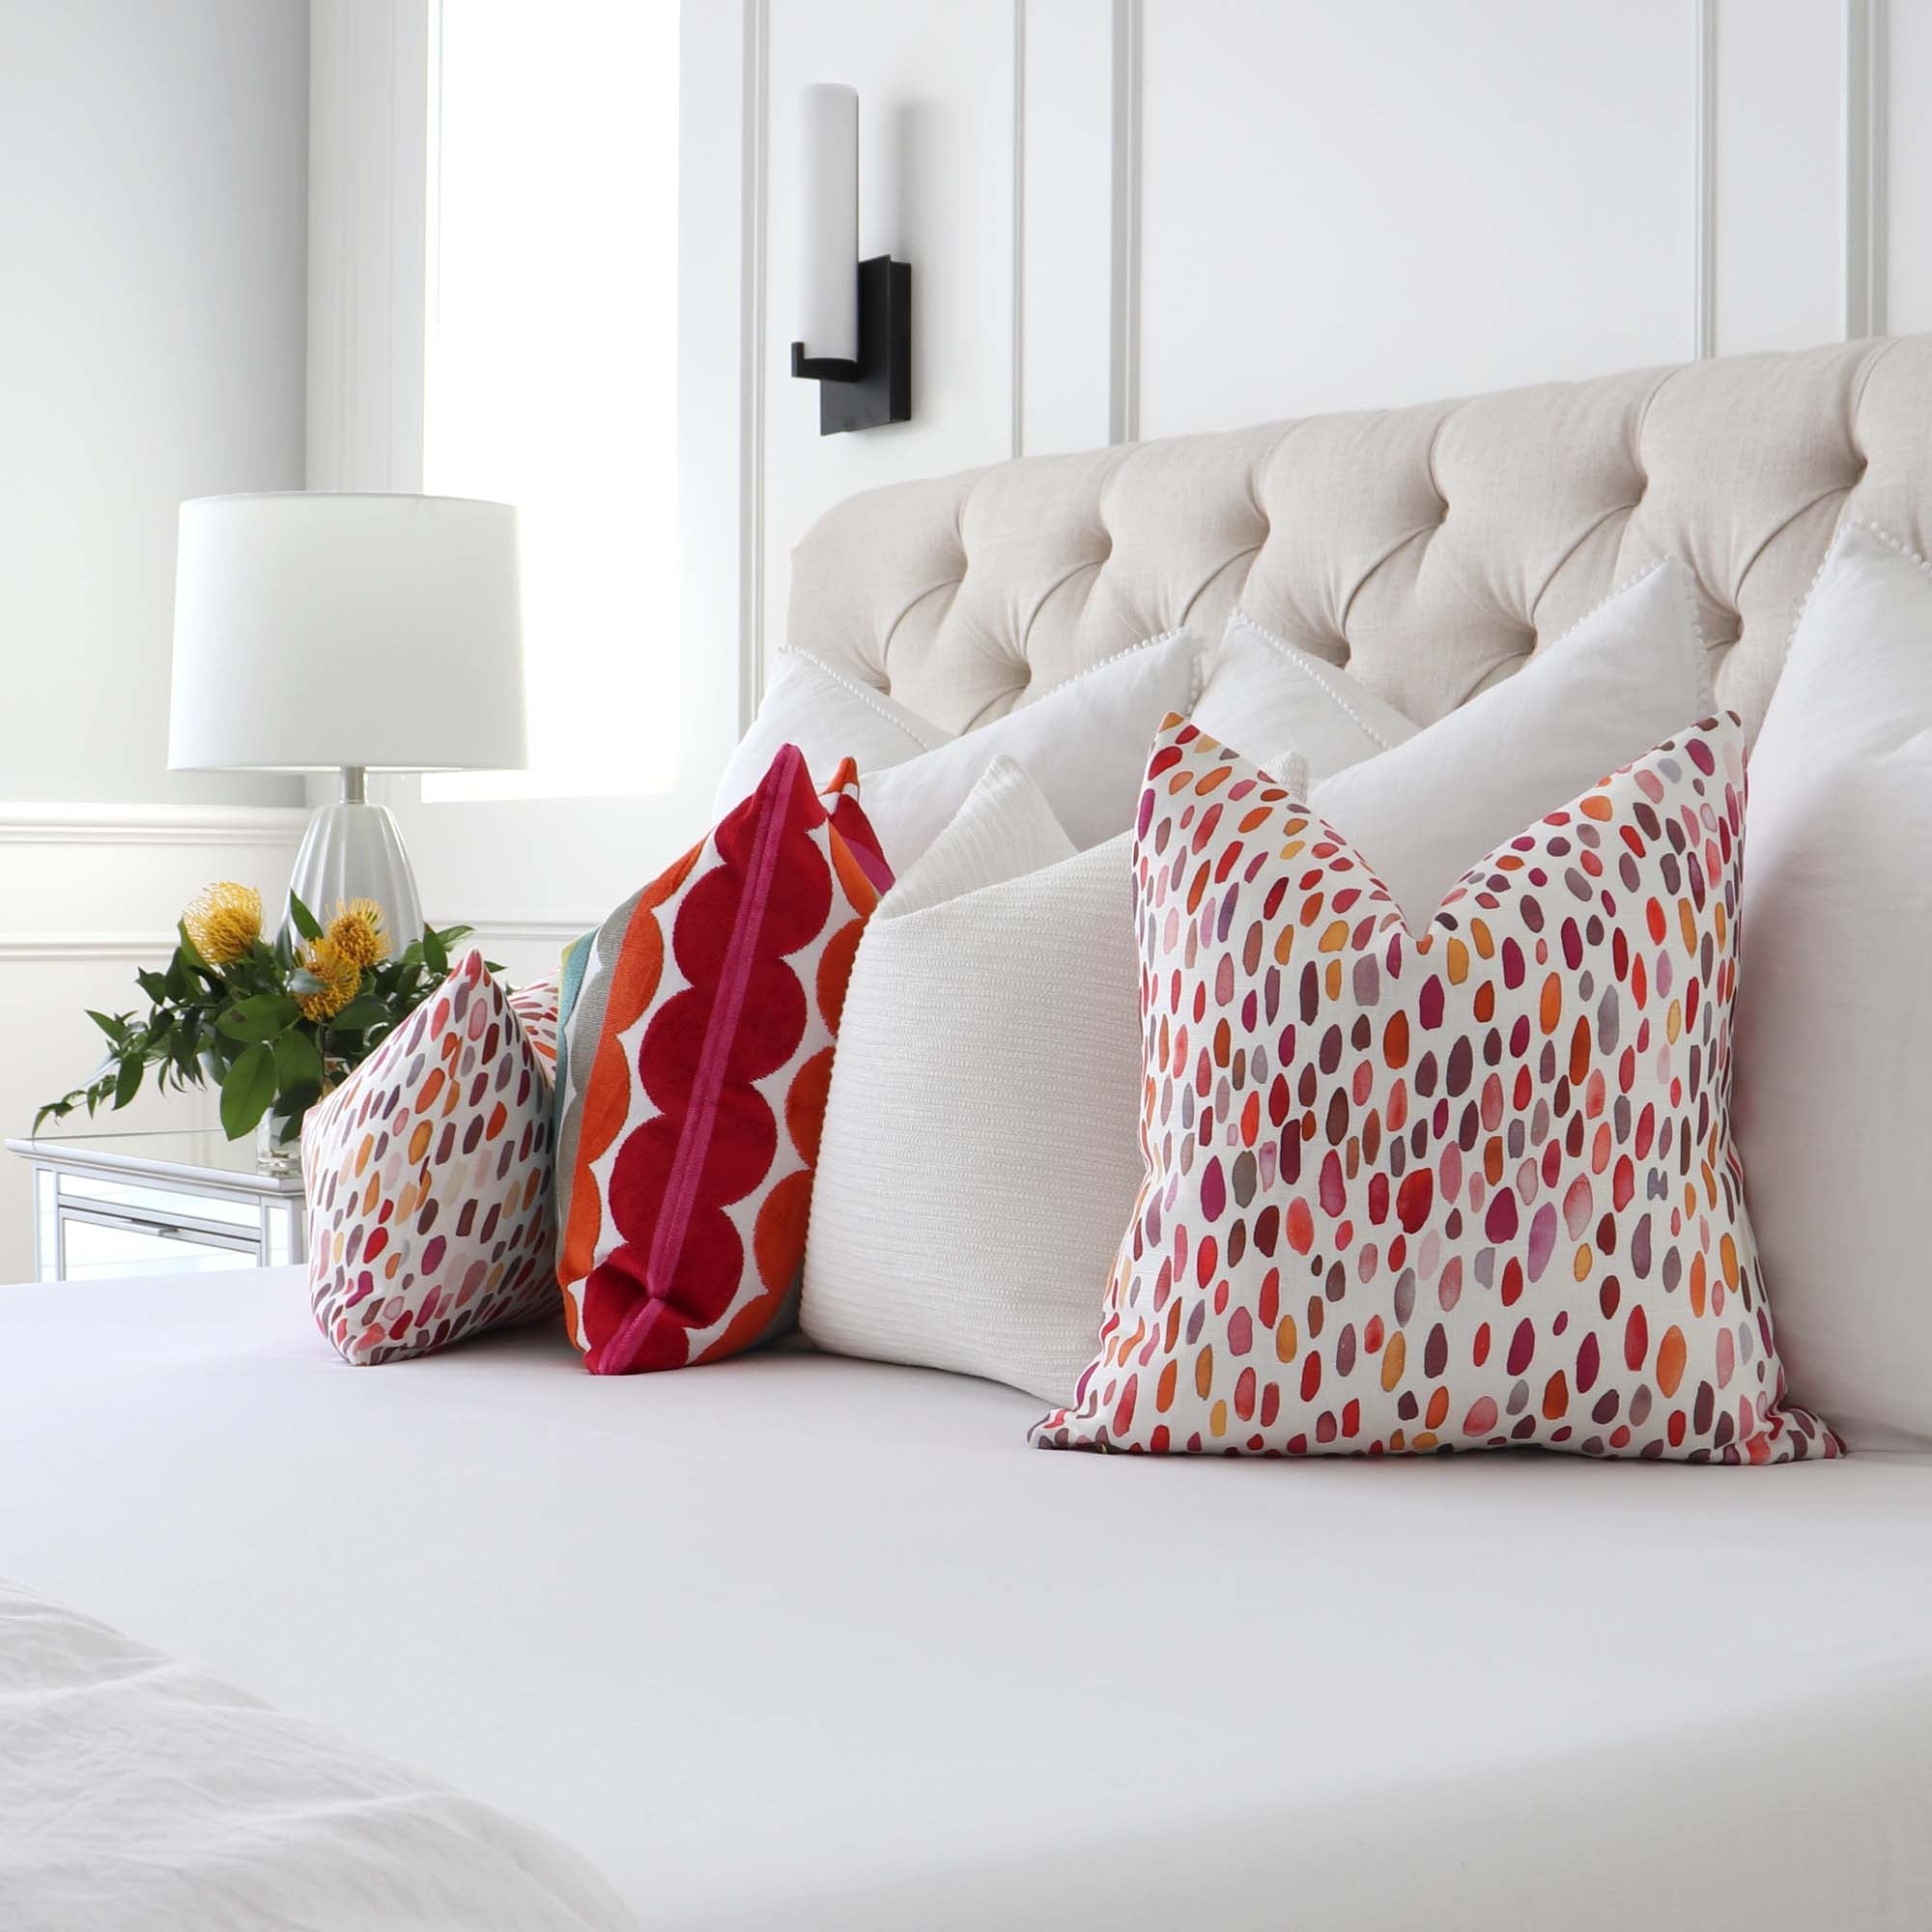 The 7 Absolute Best Places To Get Cute Throw Pillows (and a pillow size  guide) - By Sophia Lee